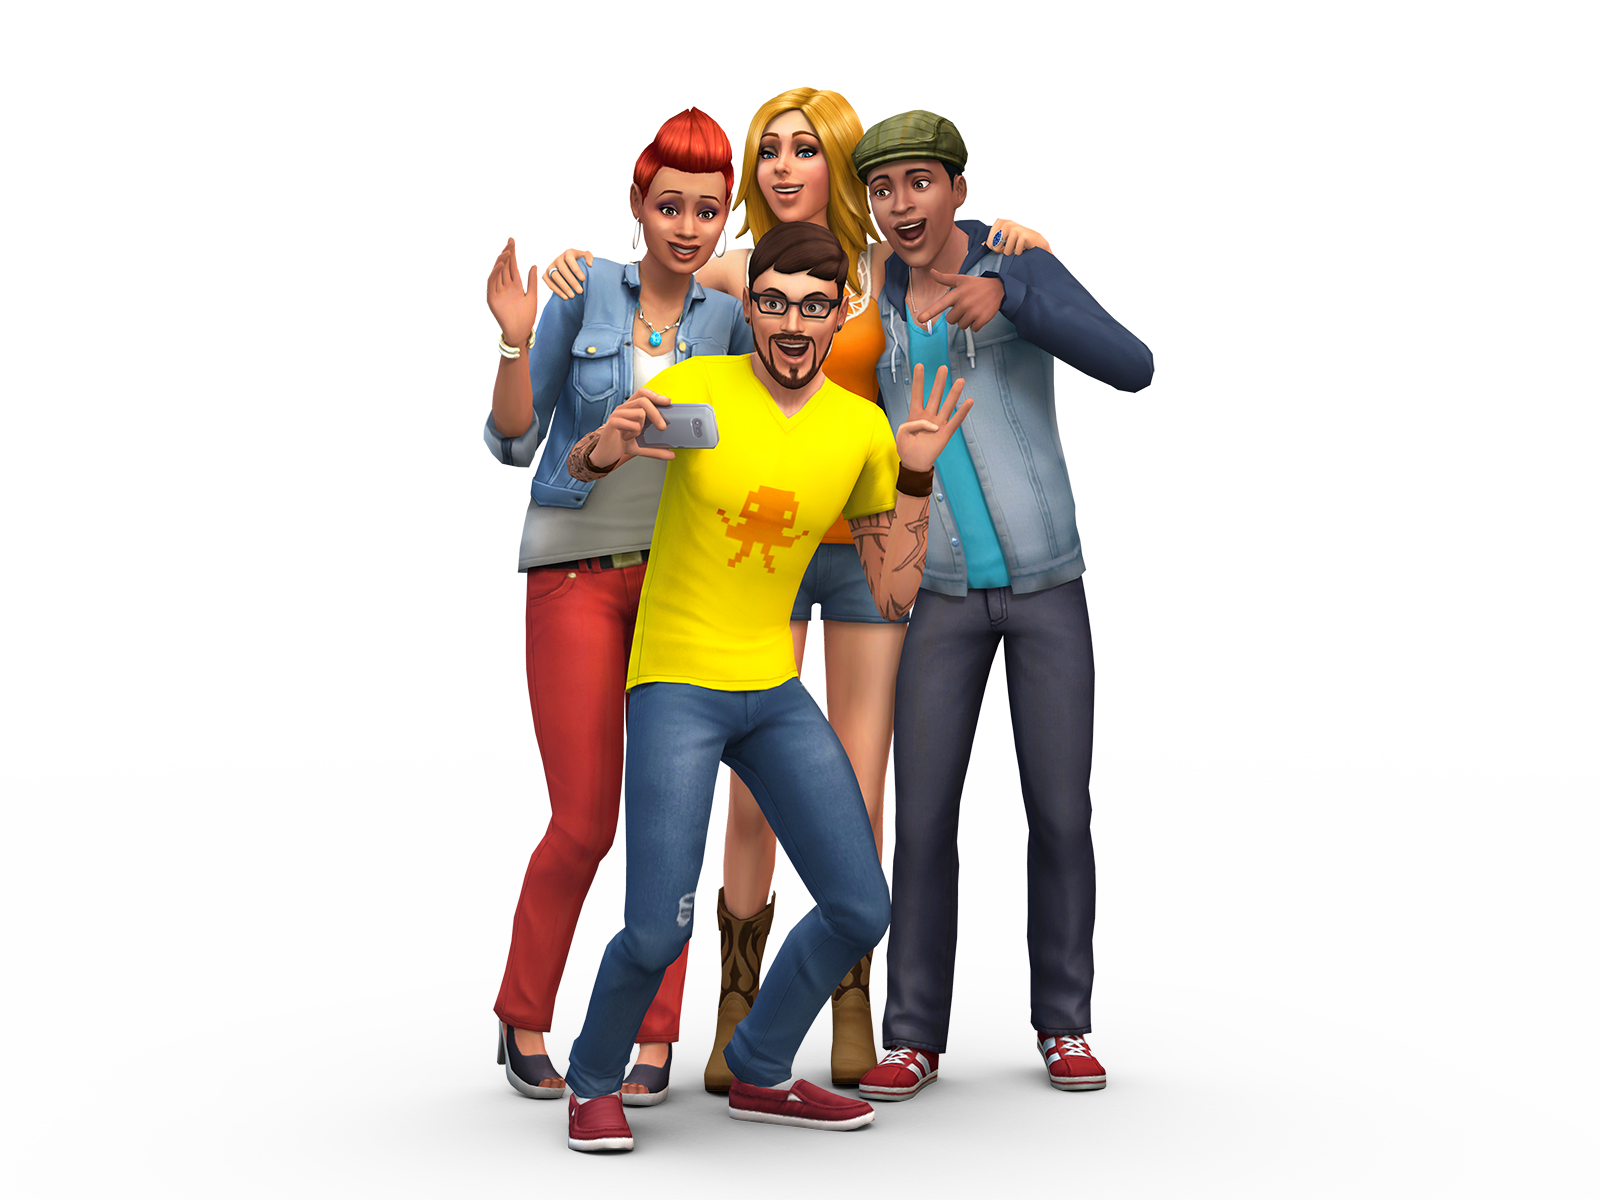 Sims 4 Plumbob Png Share This To Your Sns This Png File Is About Plumbob Sims Goimages Zone